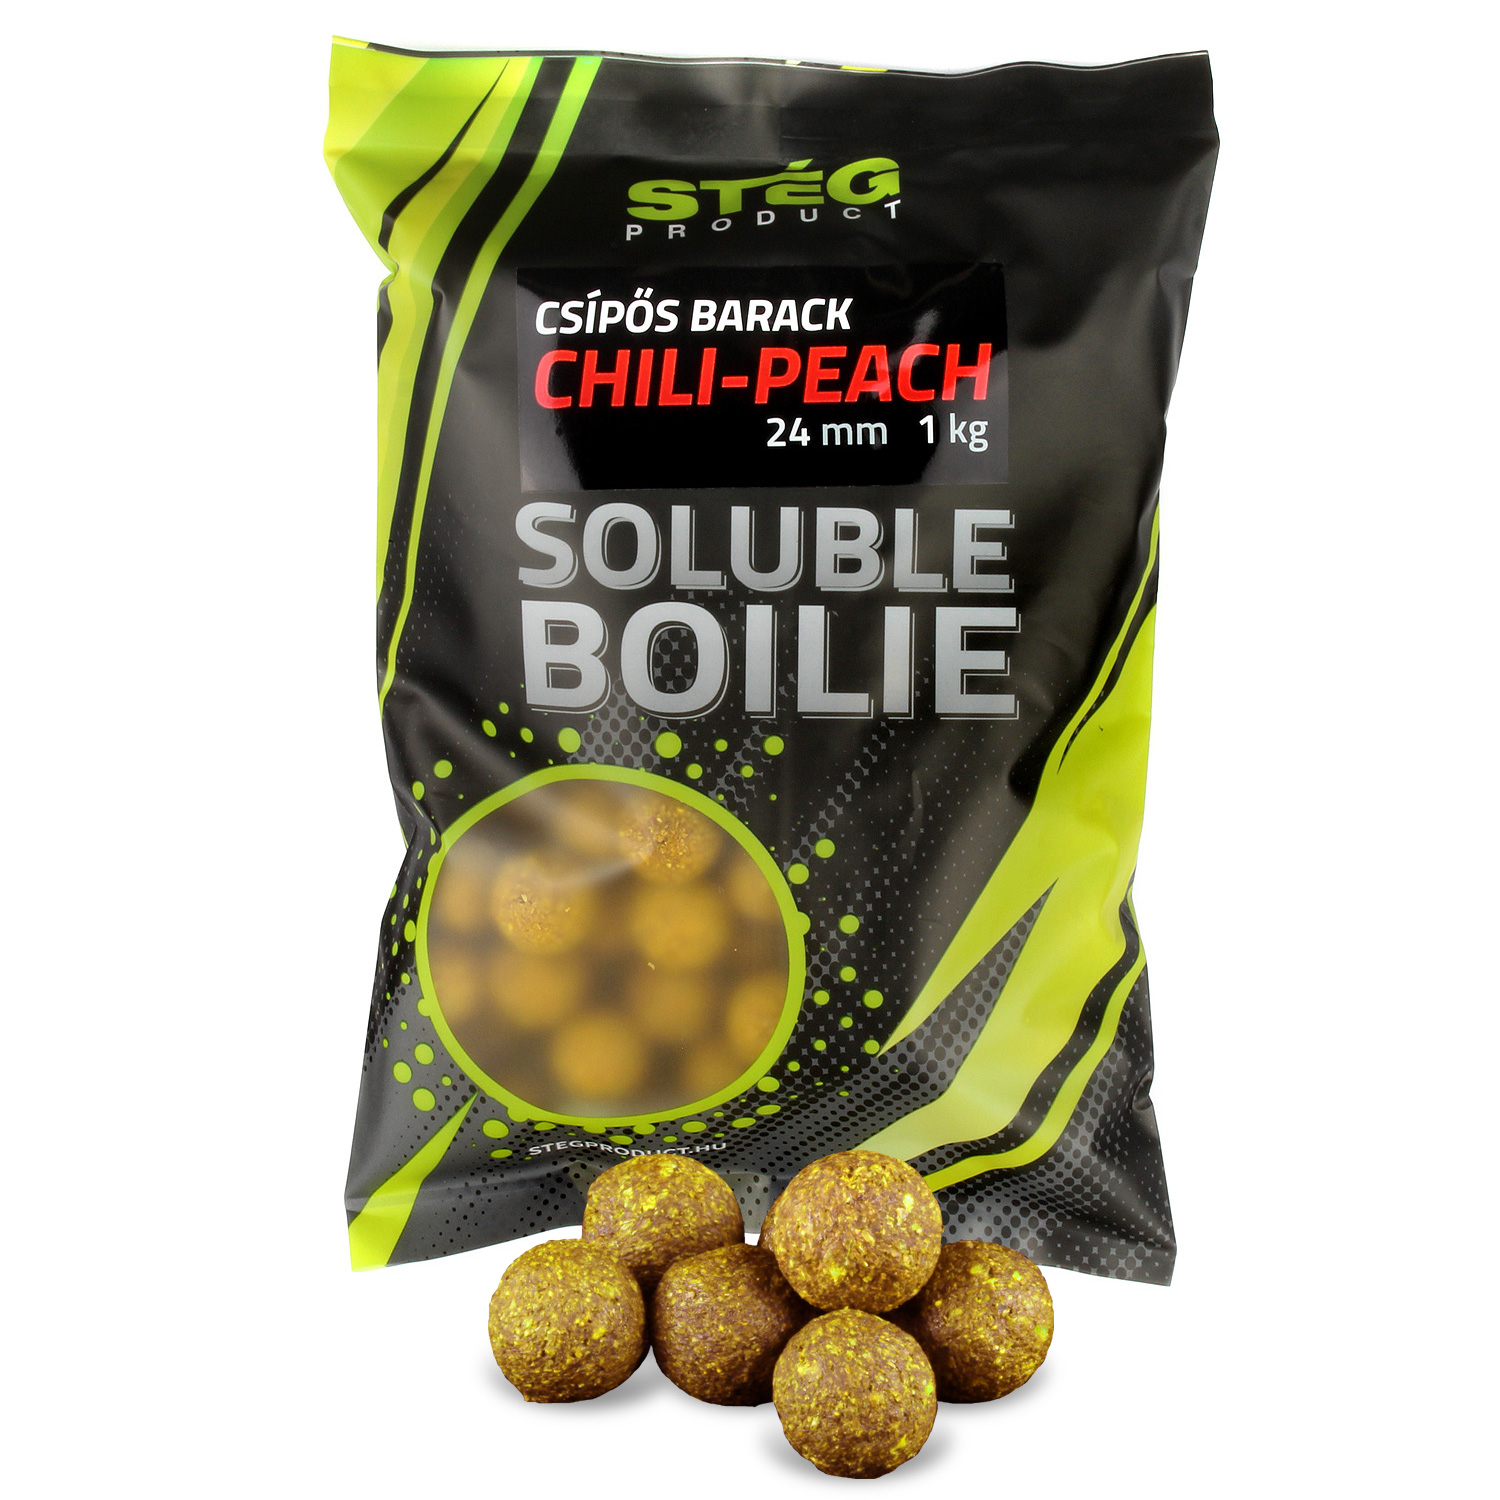 Stg Product Soluble Boilie 20mm Chili-Peach 1kg